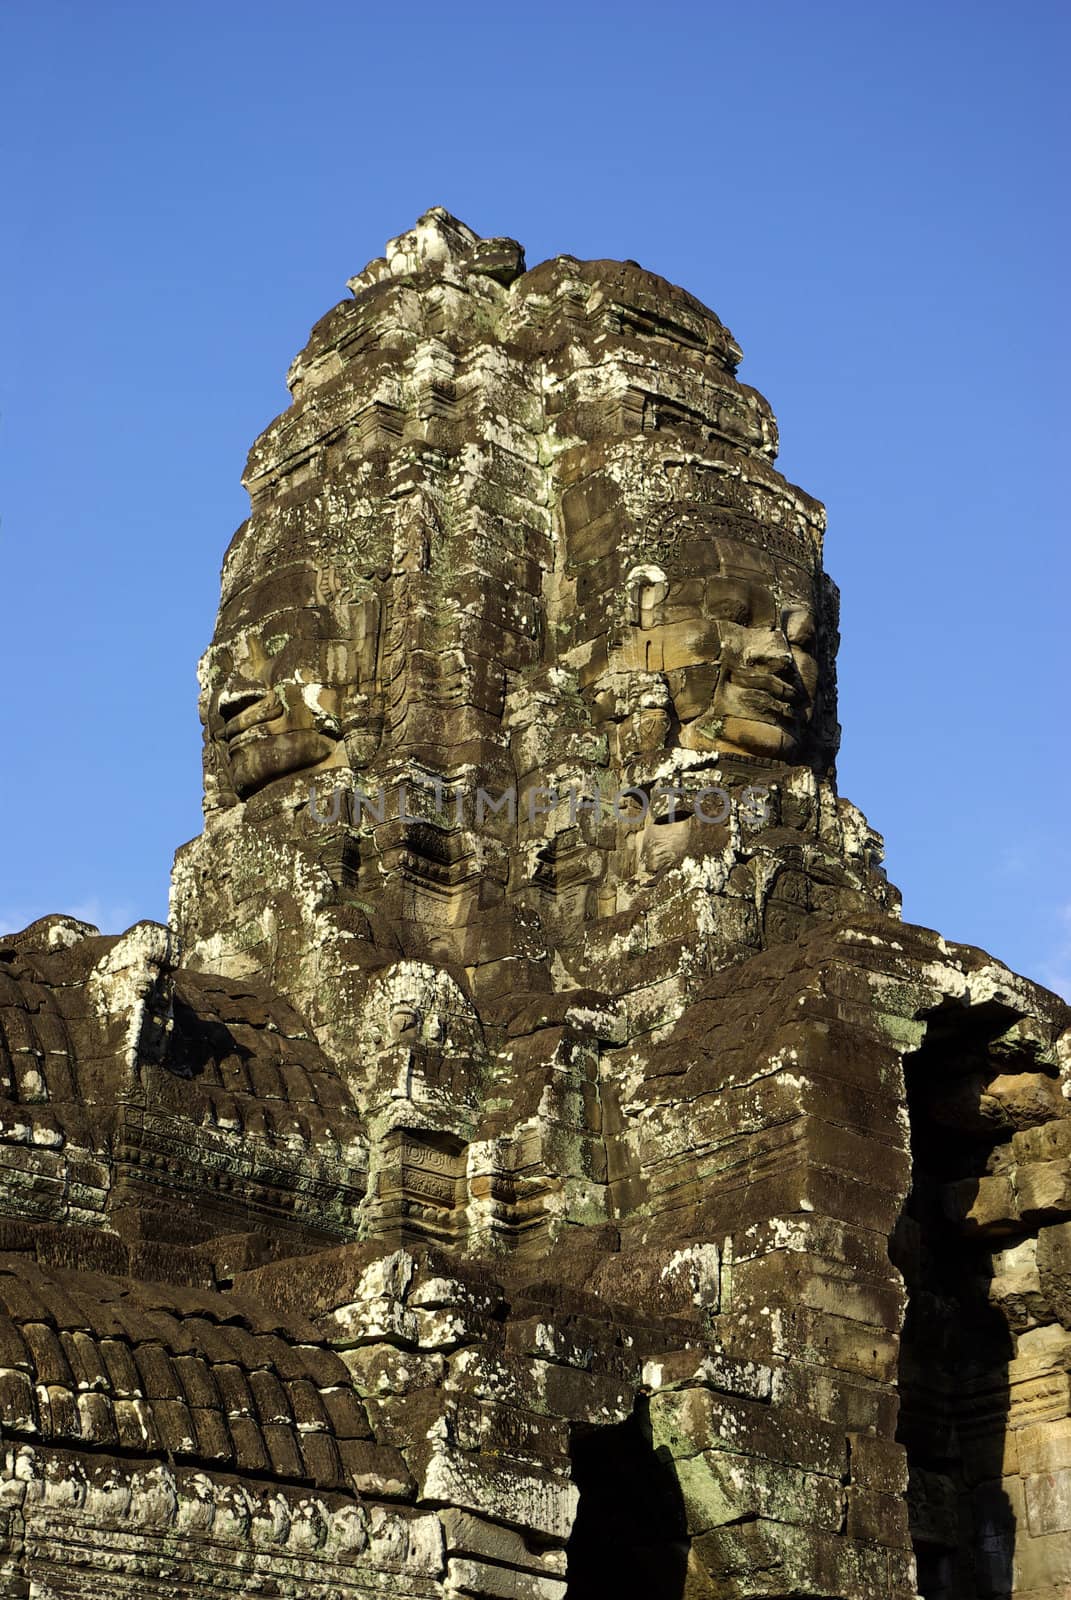 A view below a tower of Bayon Temple at Angkor where you can see faces of stone